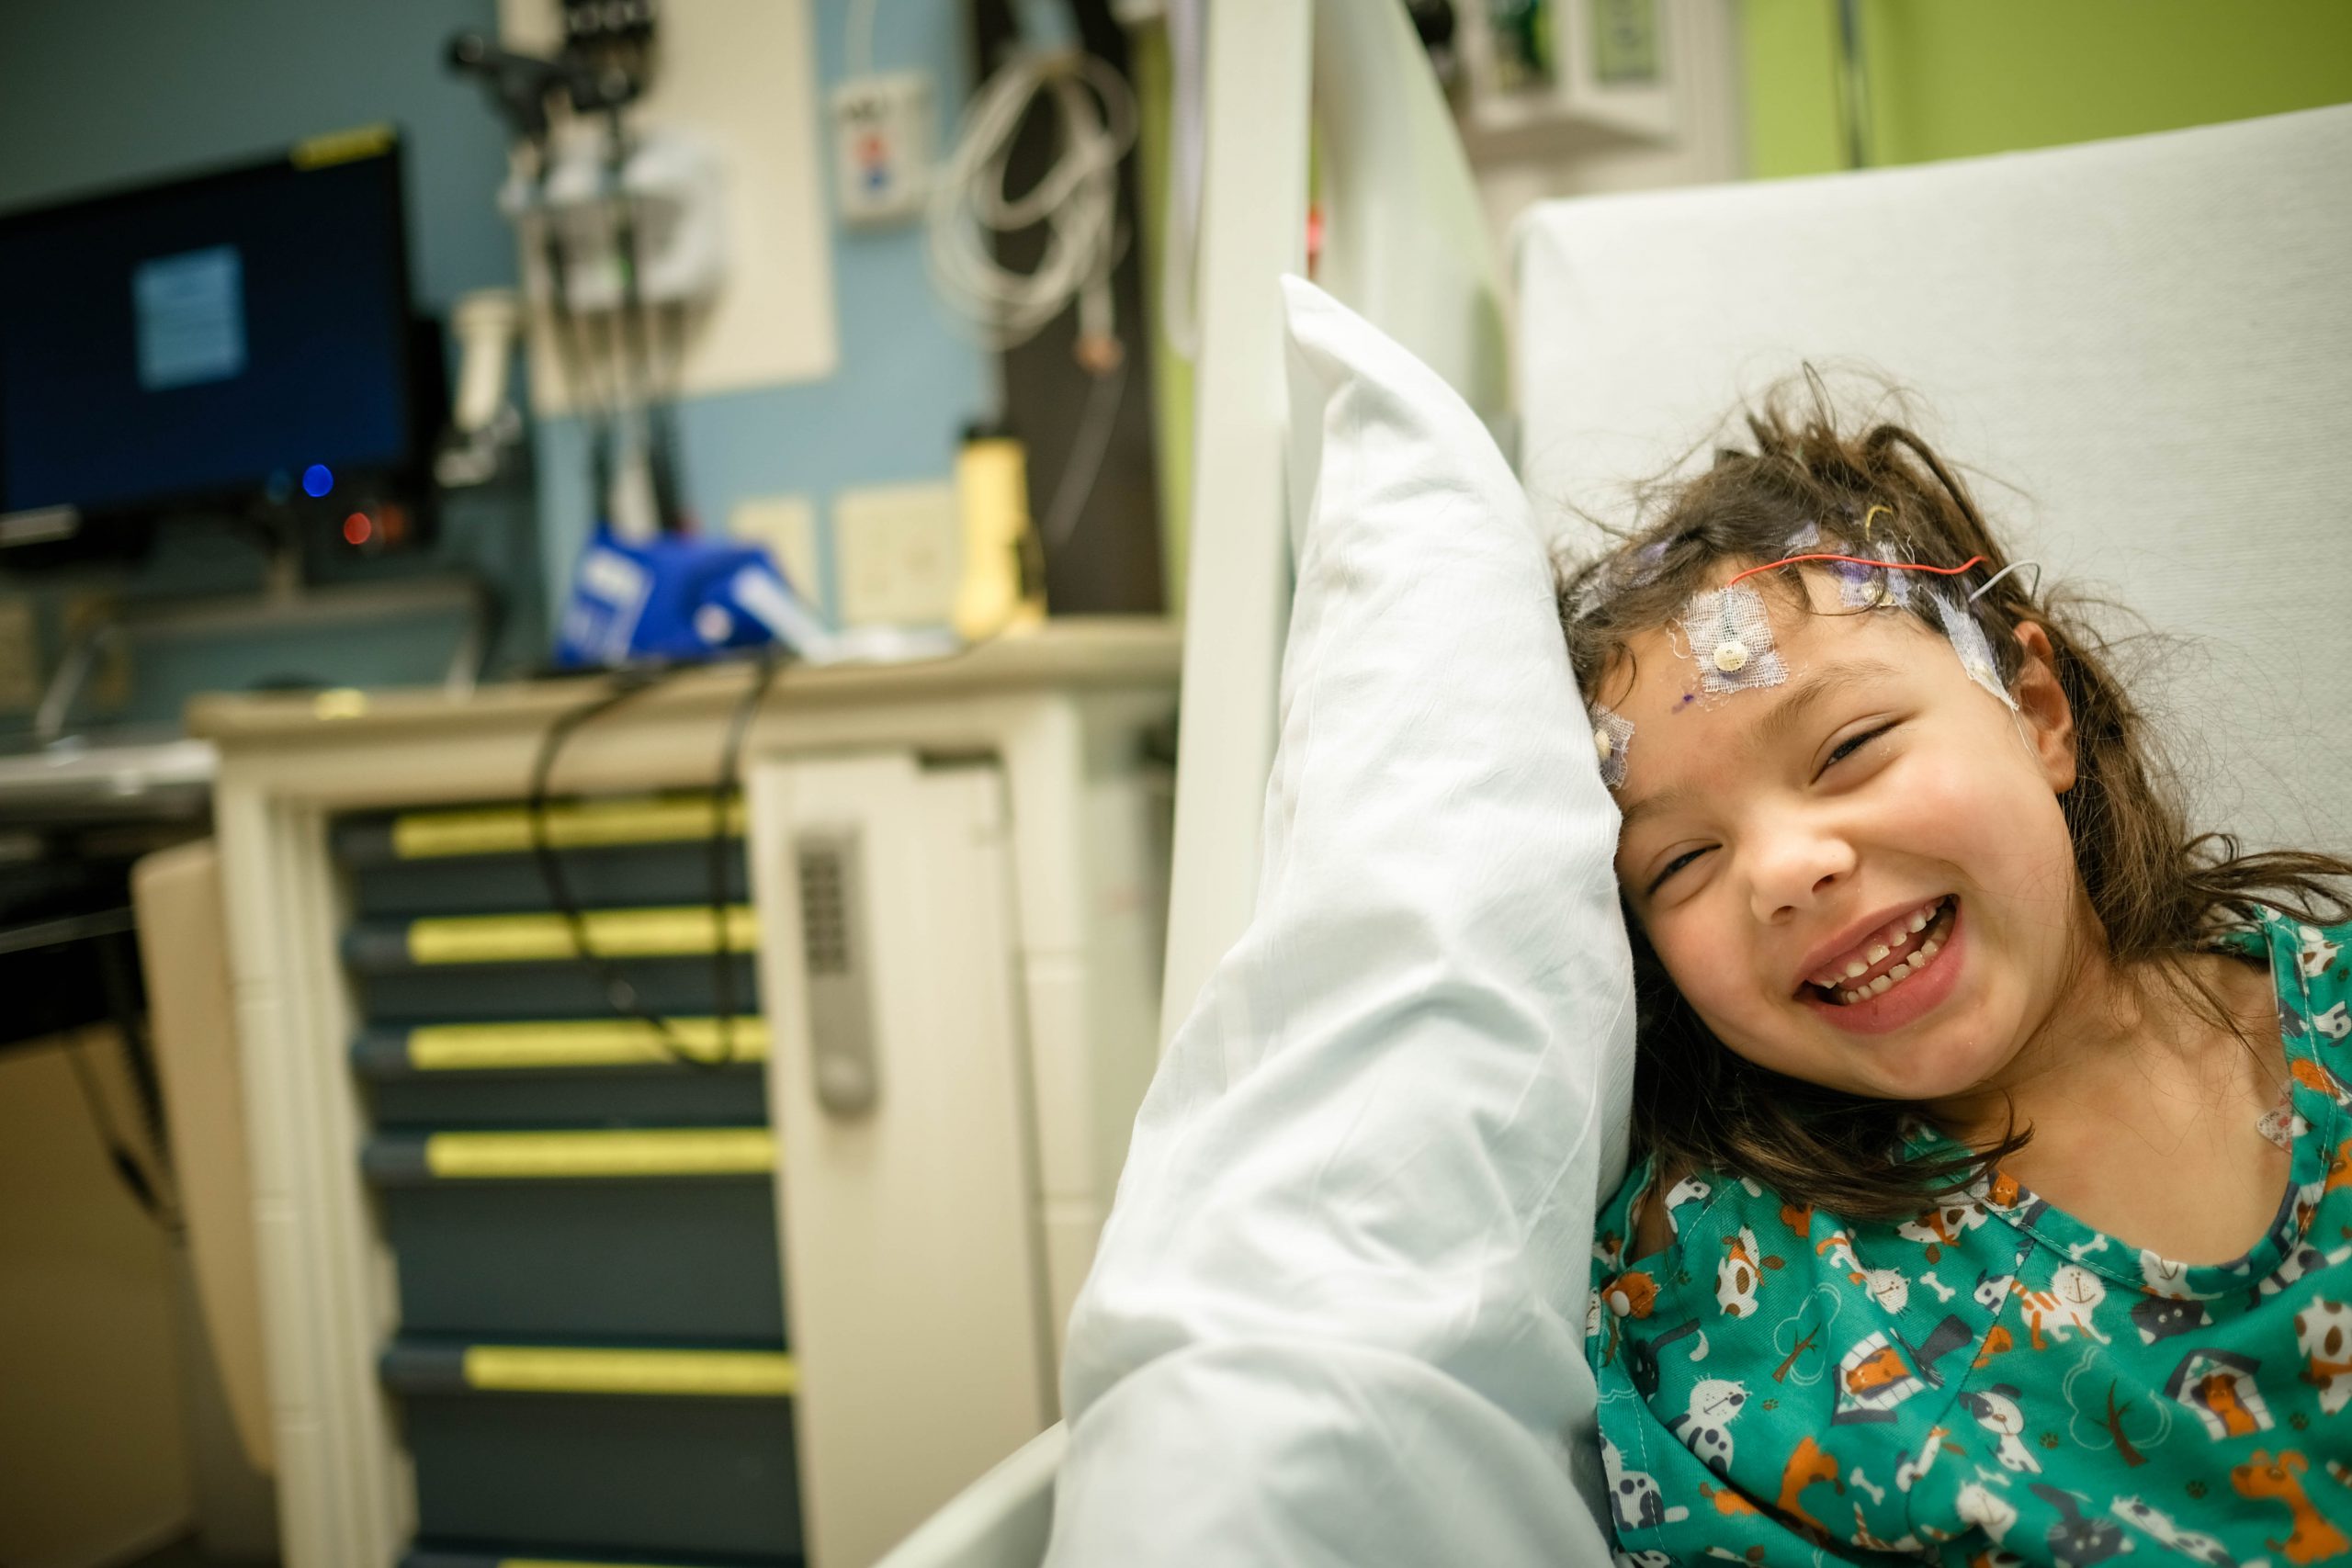 a child is in a hospital bed with medical wires connected to their forehead. They are in a hospital gown and smiling at the camera.